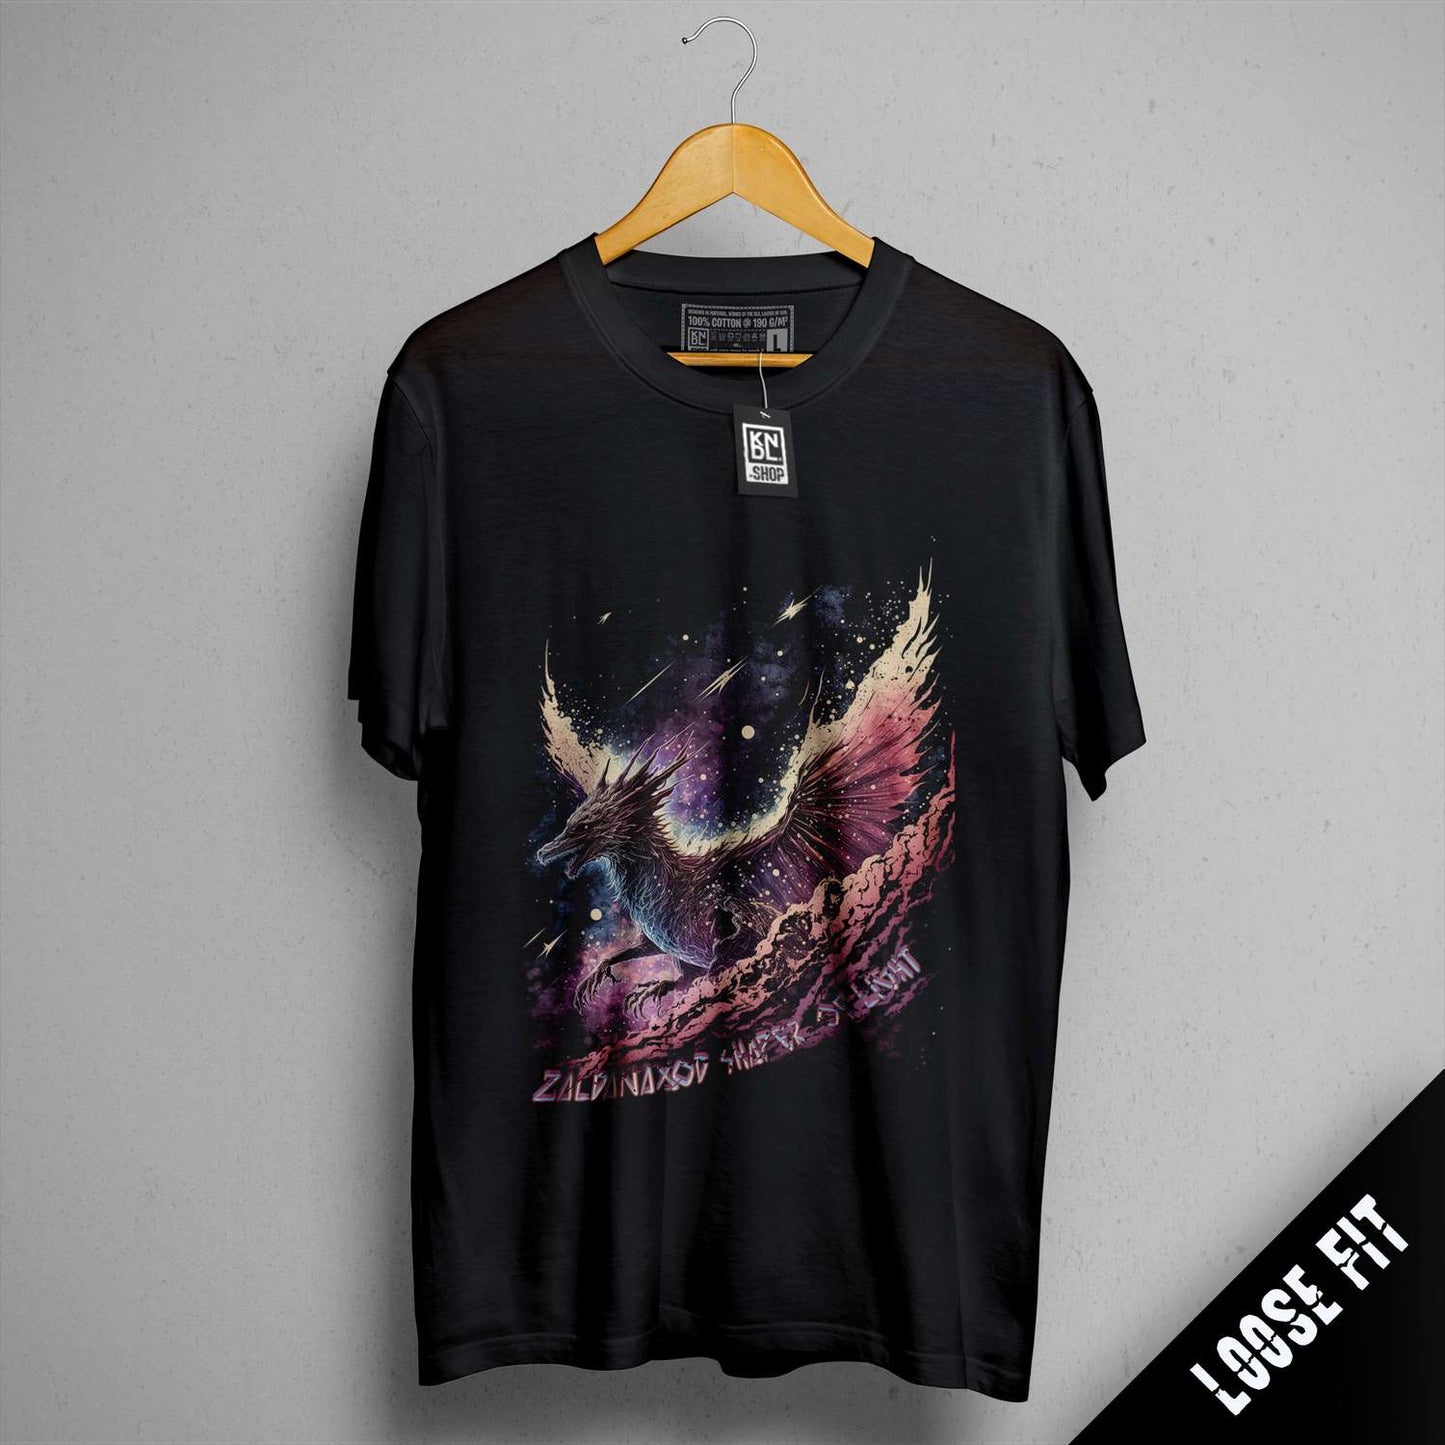 a black t - shirt with a picture of a dragon on it